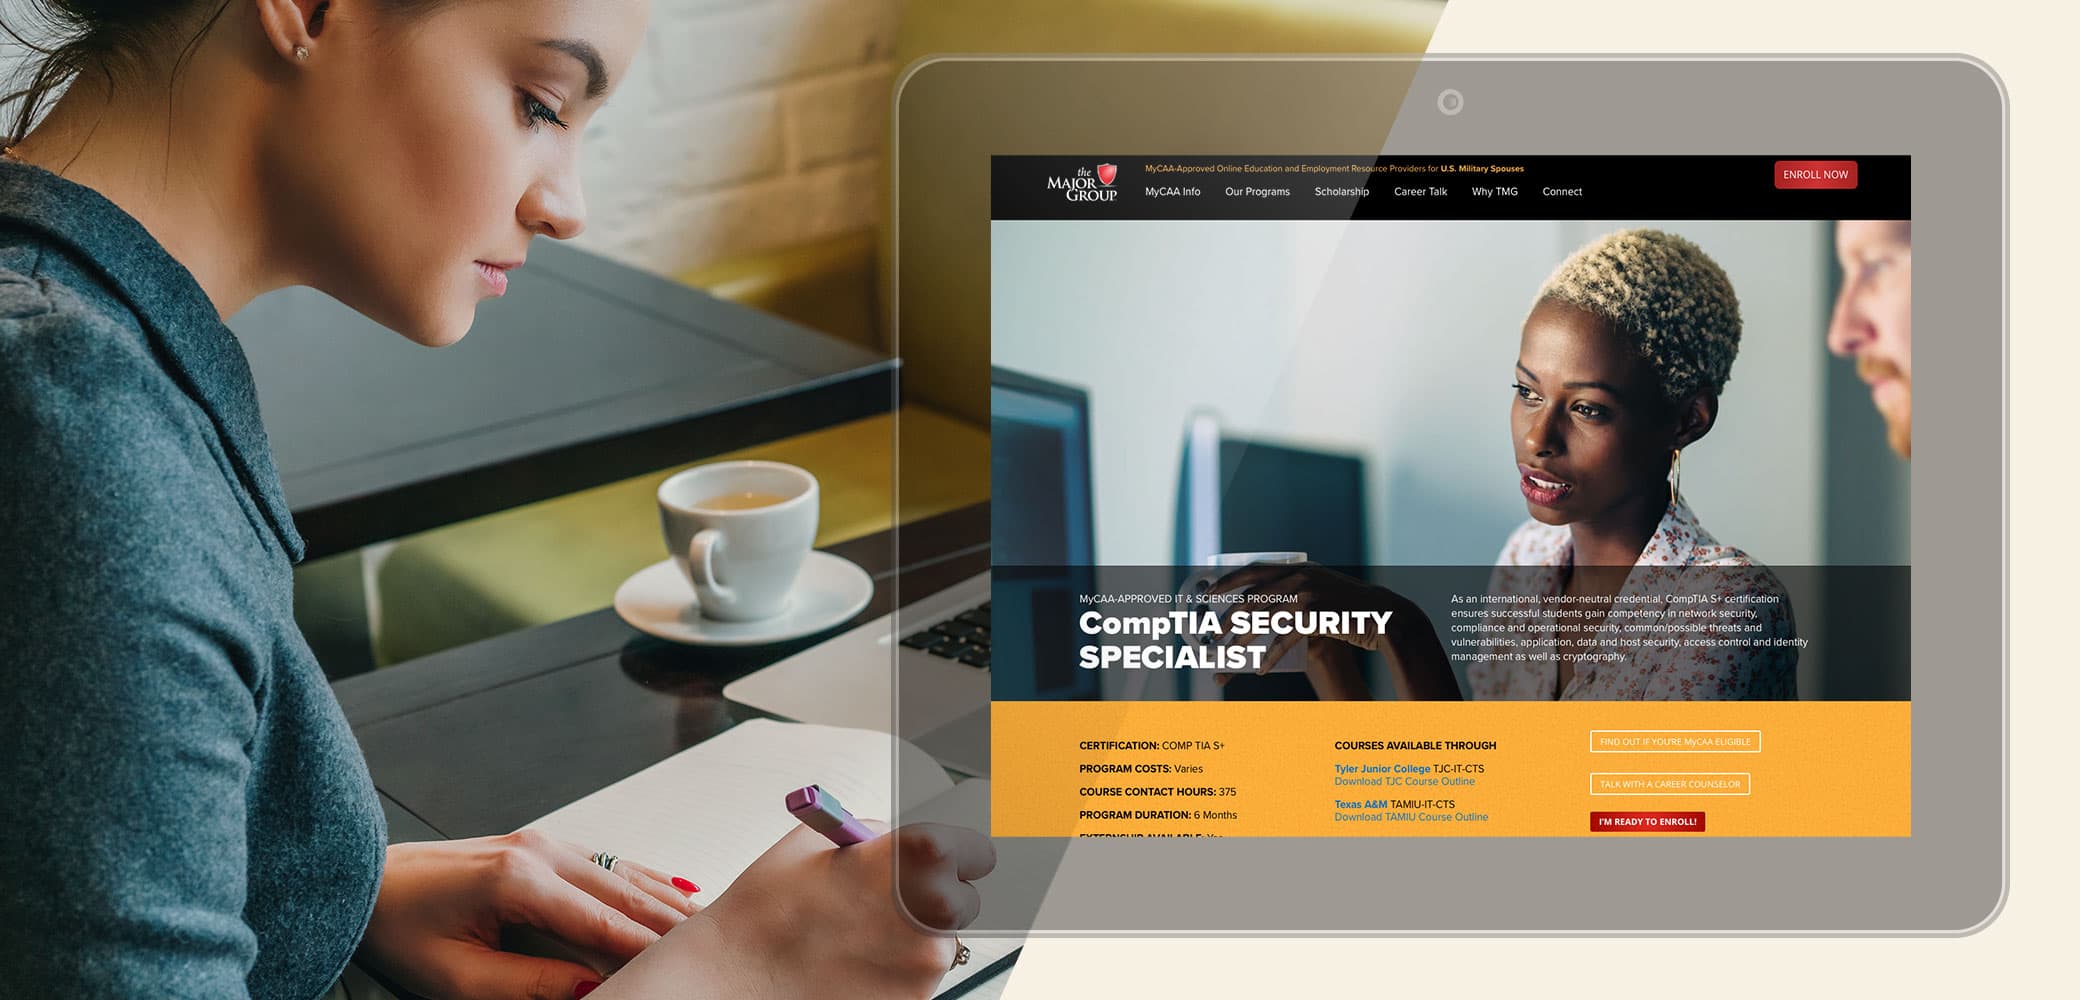 The Major Group Training Website Strategy, Design & Development by Red Chalk Studios